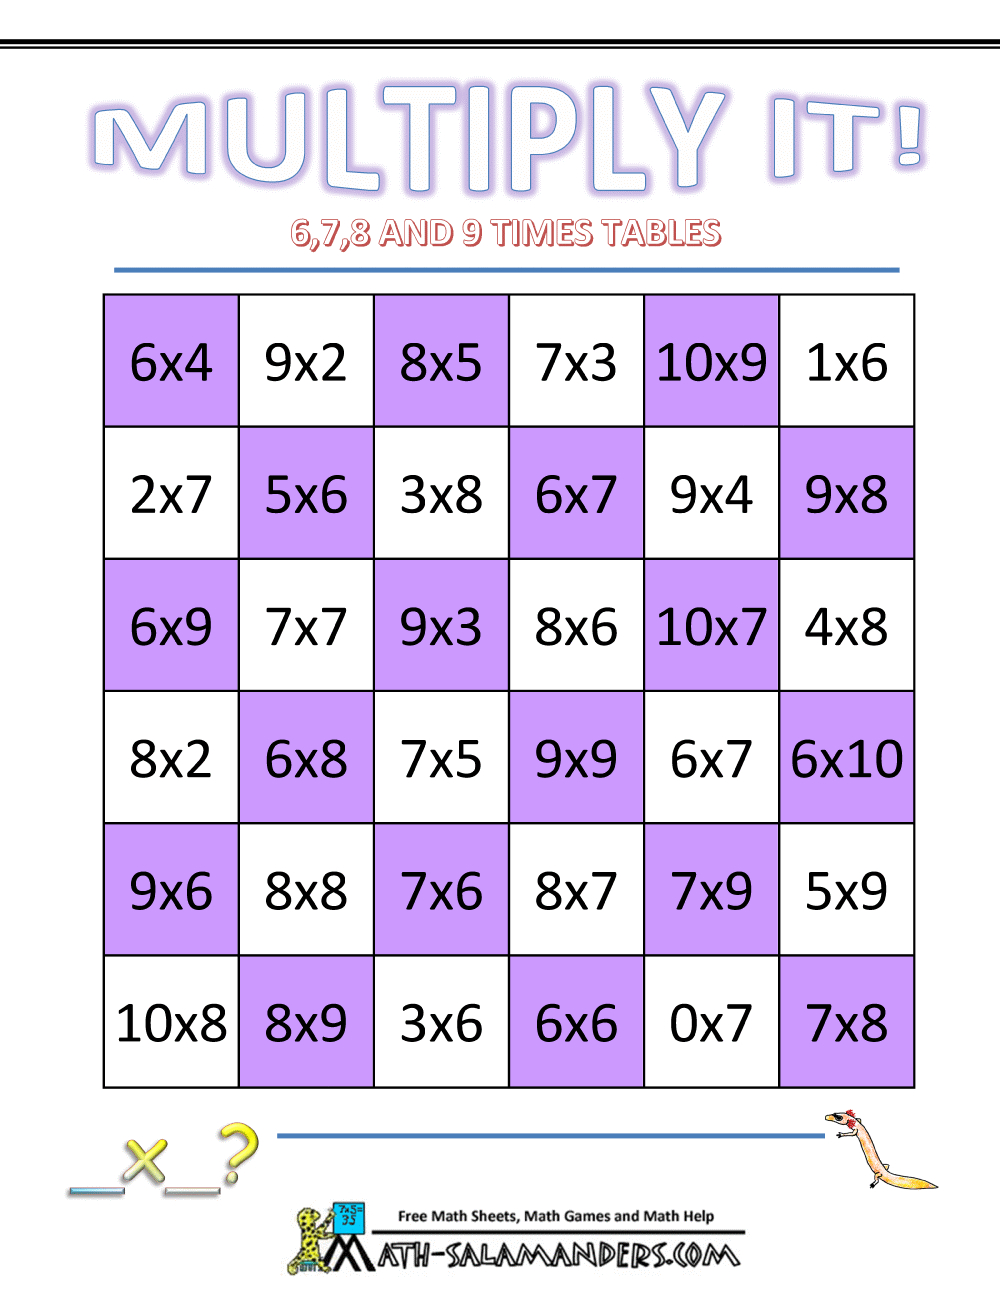 Multiplication Flash Cards Printable Numbers 1-10 Flashcards